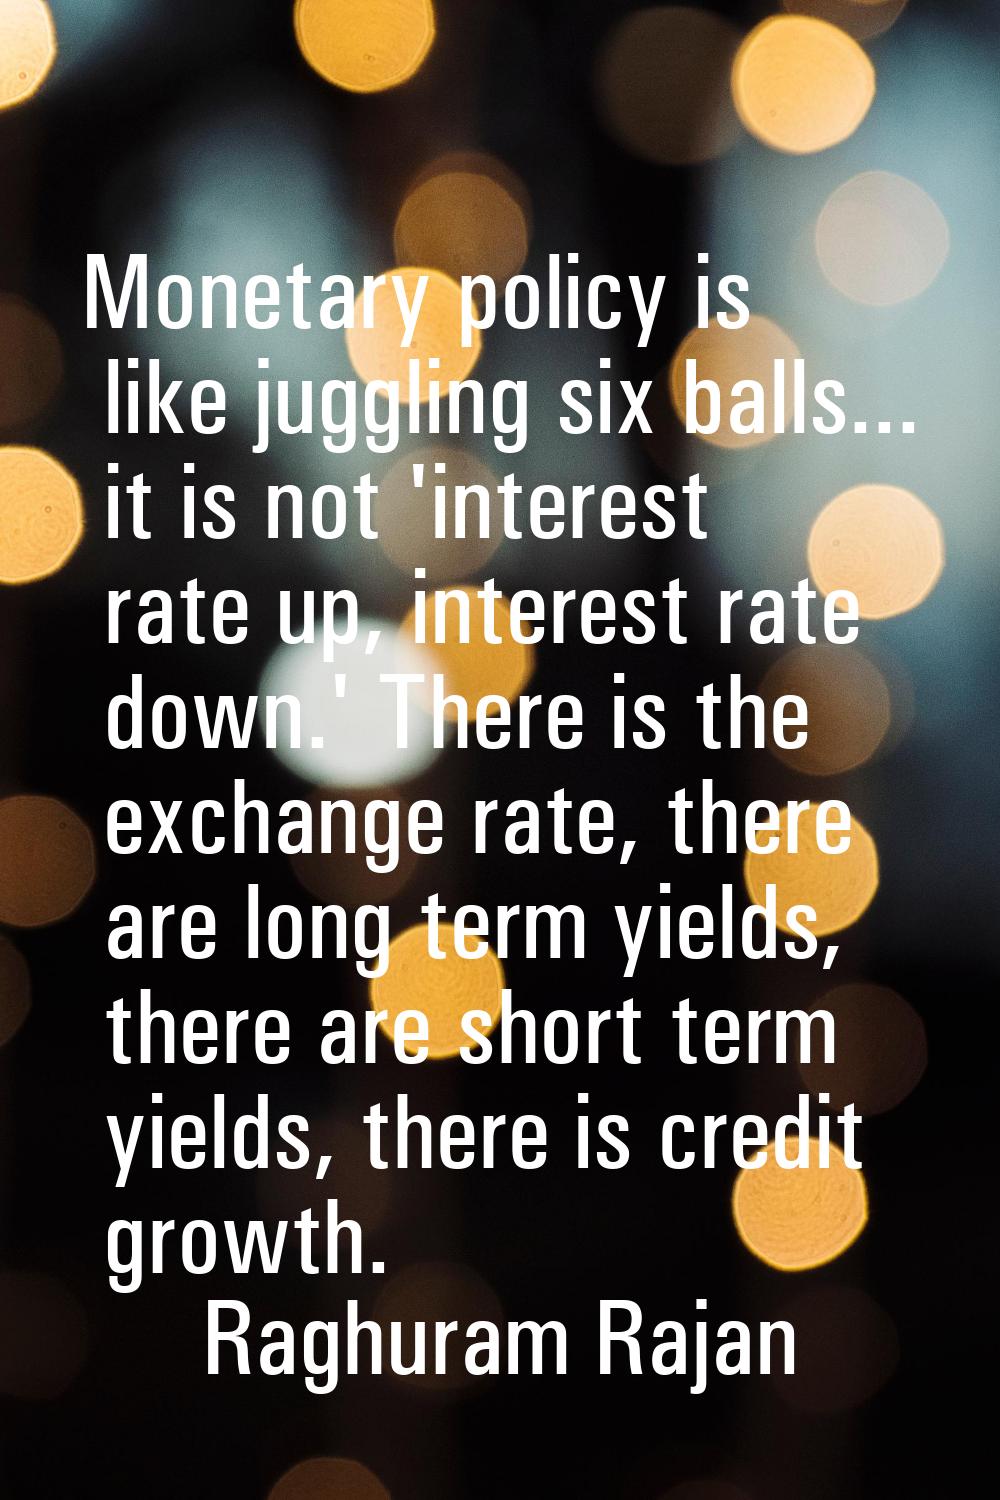 Monetary policy is like juggling six balls... it is not 'interest rate up, interest rate down.' The